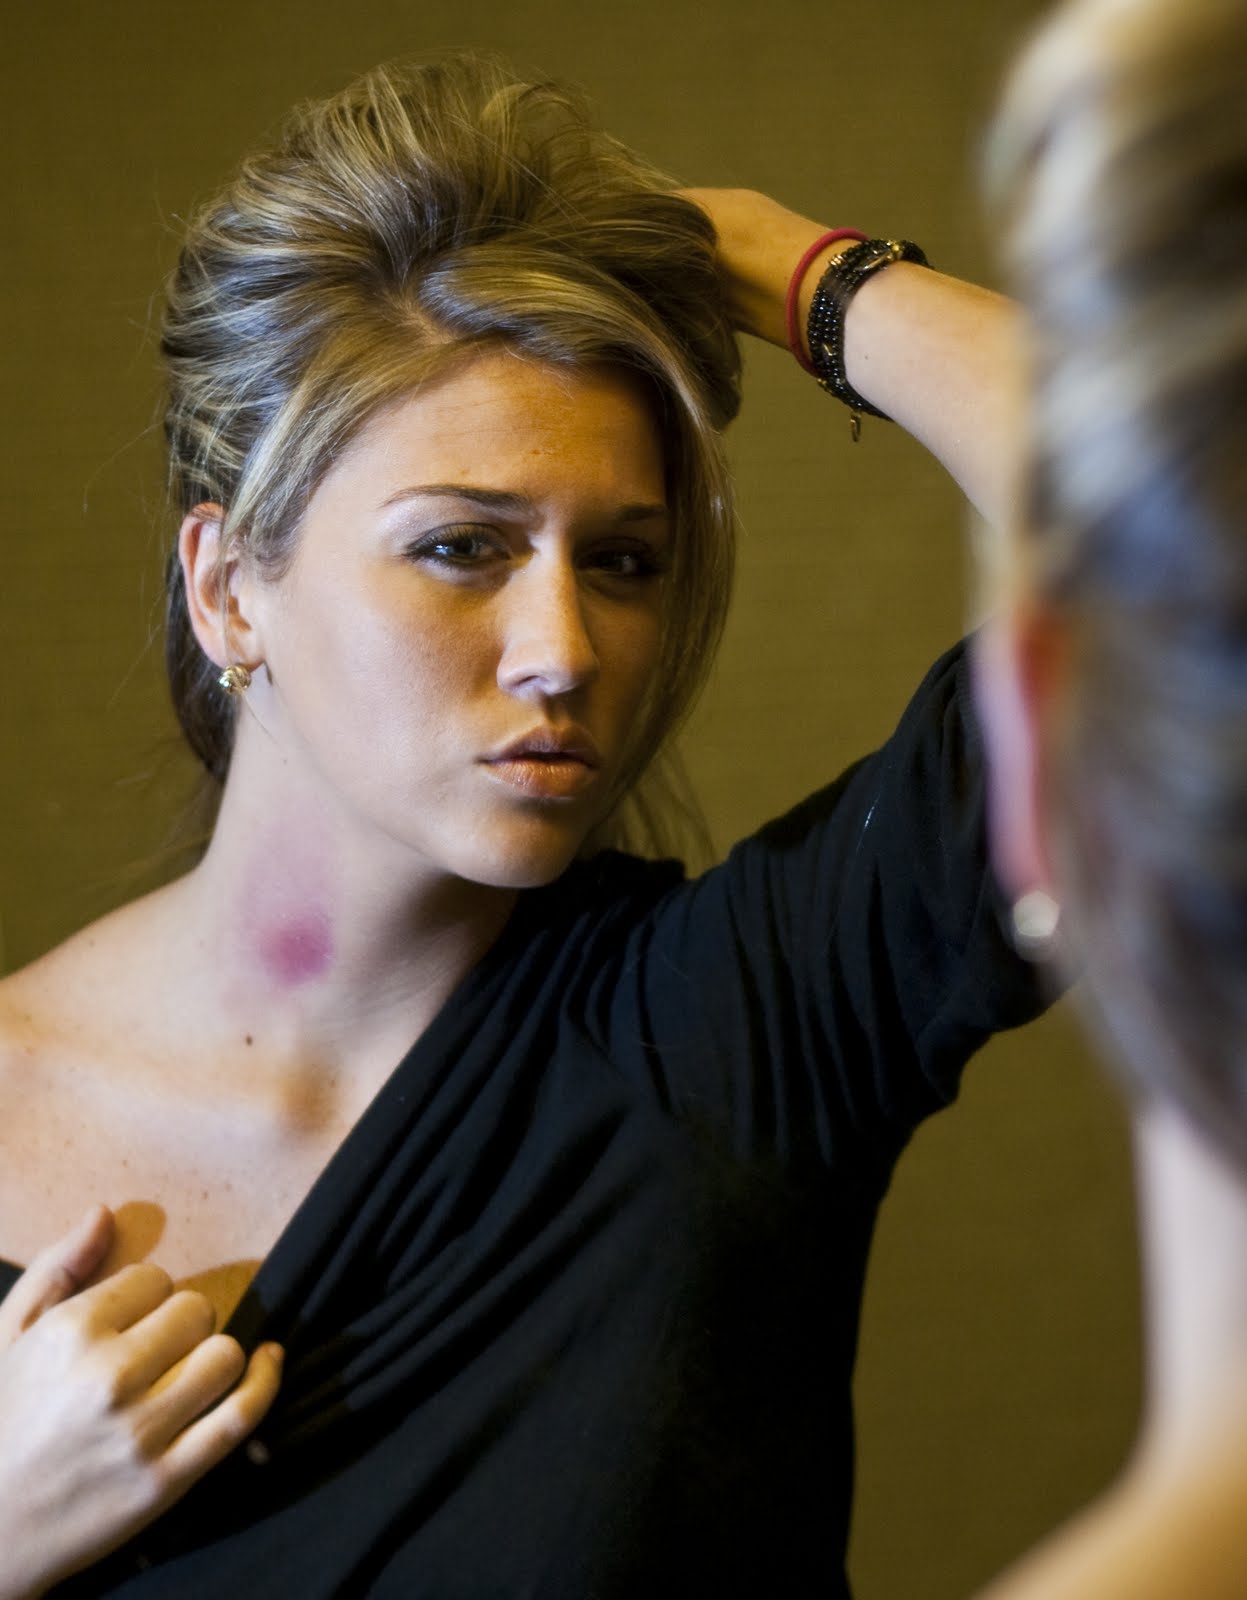 How Long Does A Hickey Last For If Left Untreated